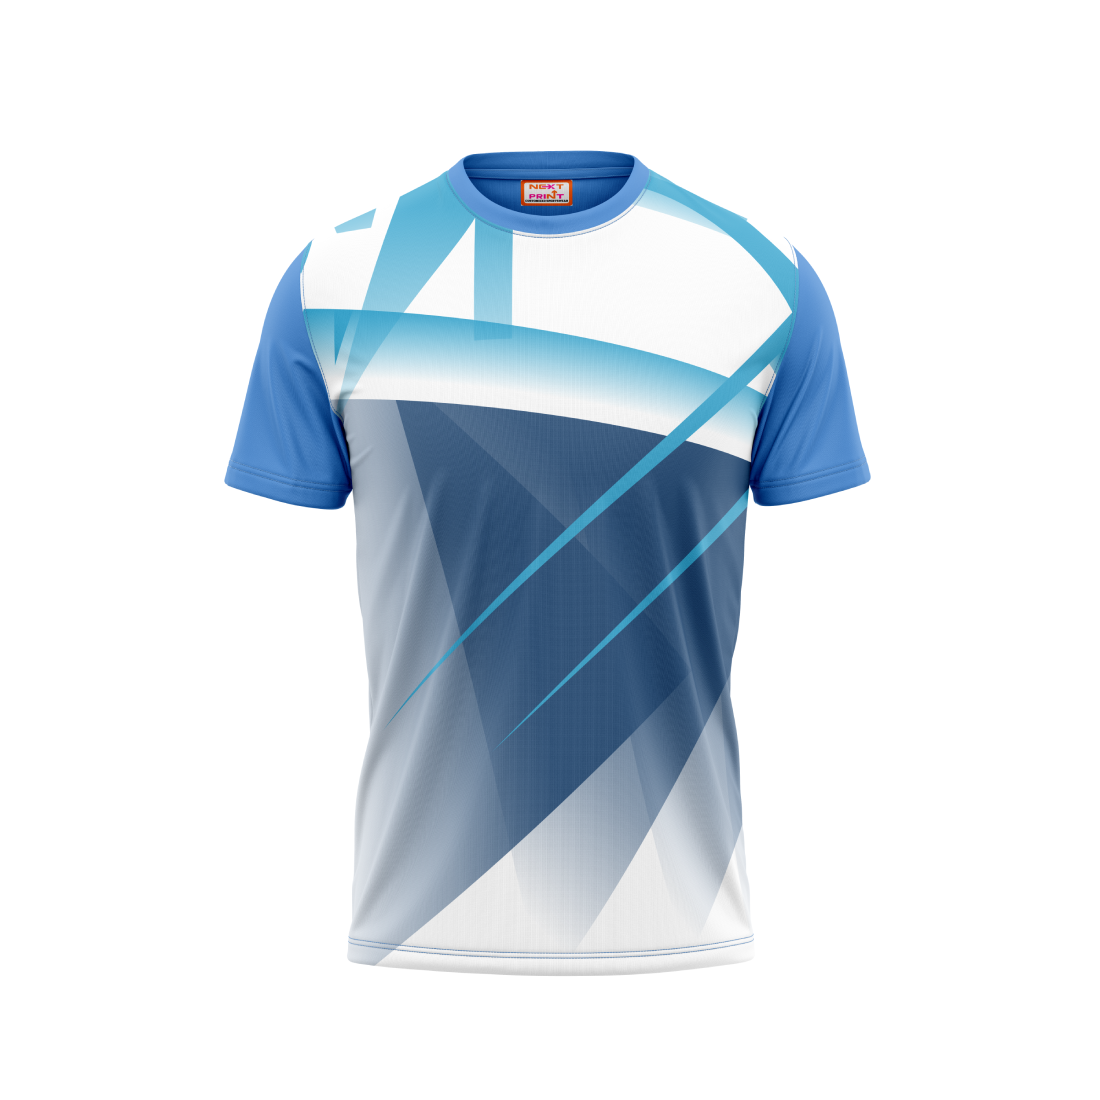 Round Neck Printed Jersey Skyblue NP5000021